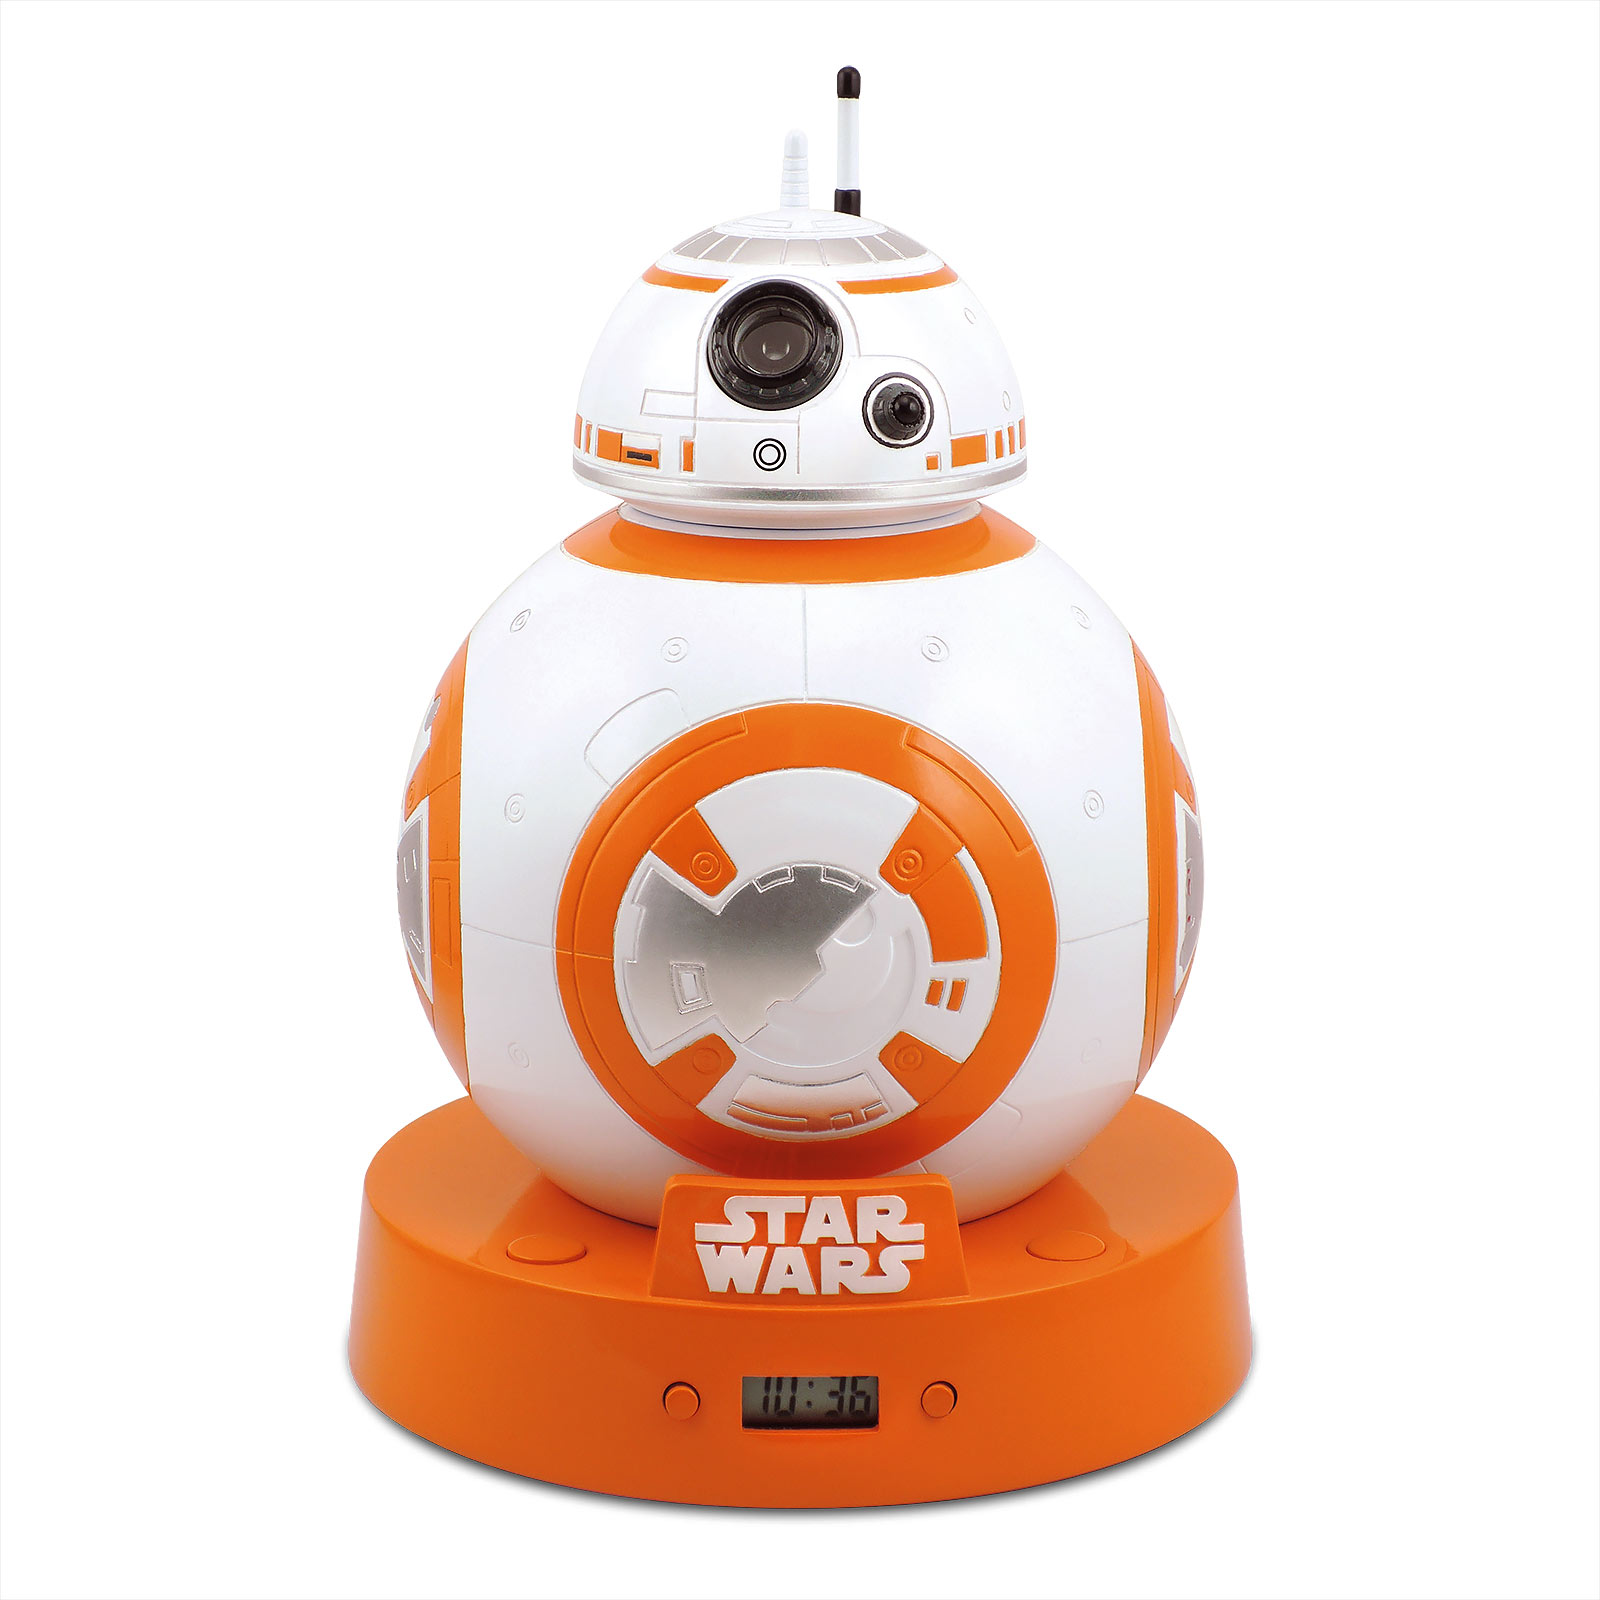 Star Wars - BB-8 Alarm Clock with Projection and Sound